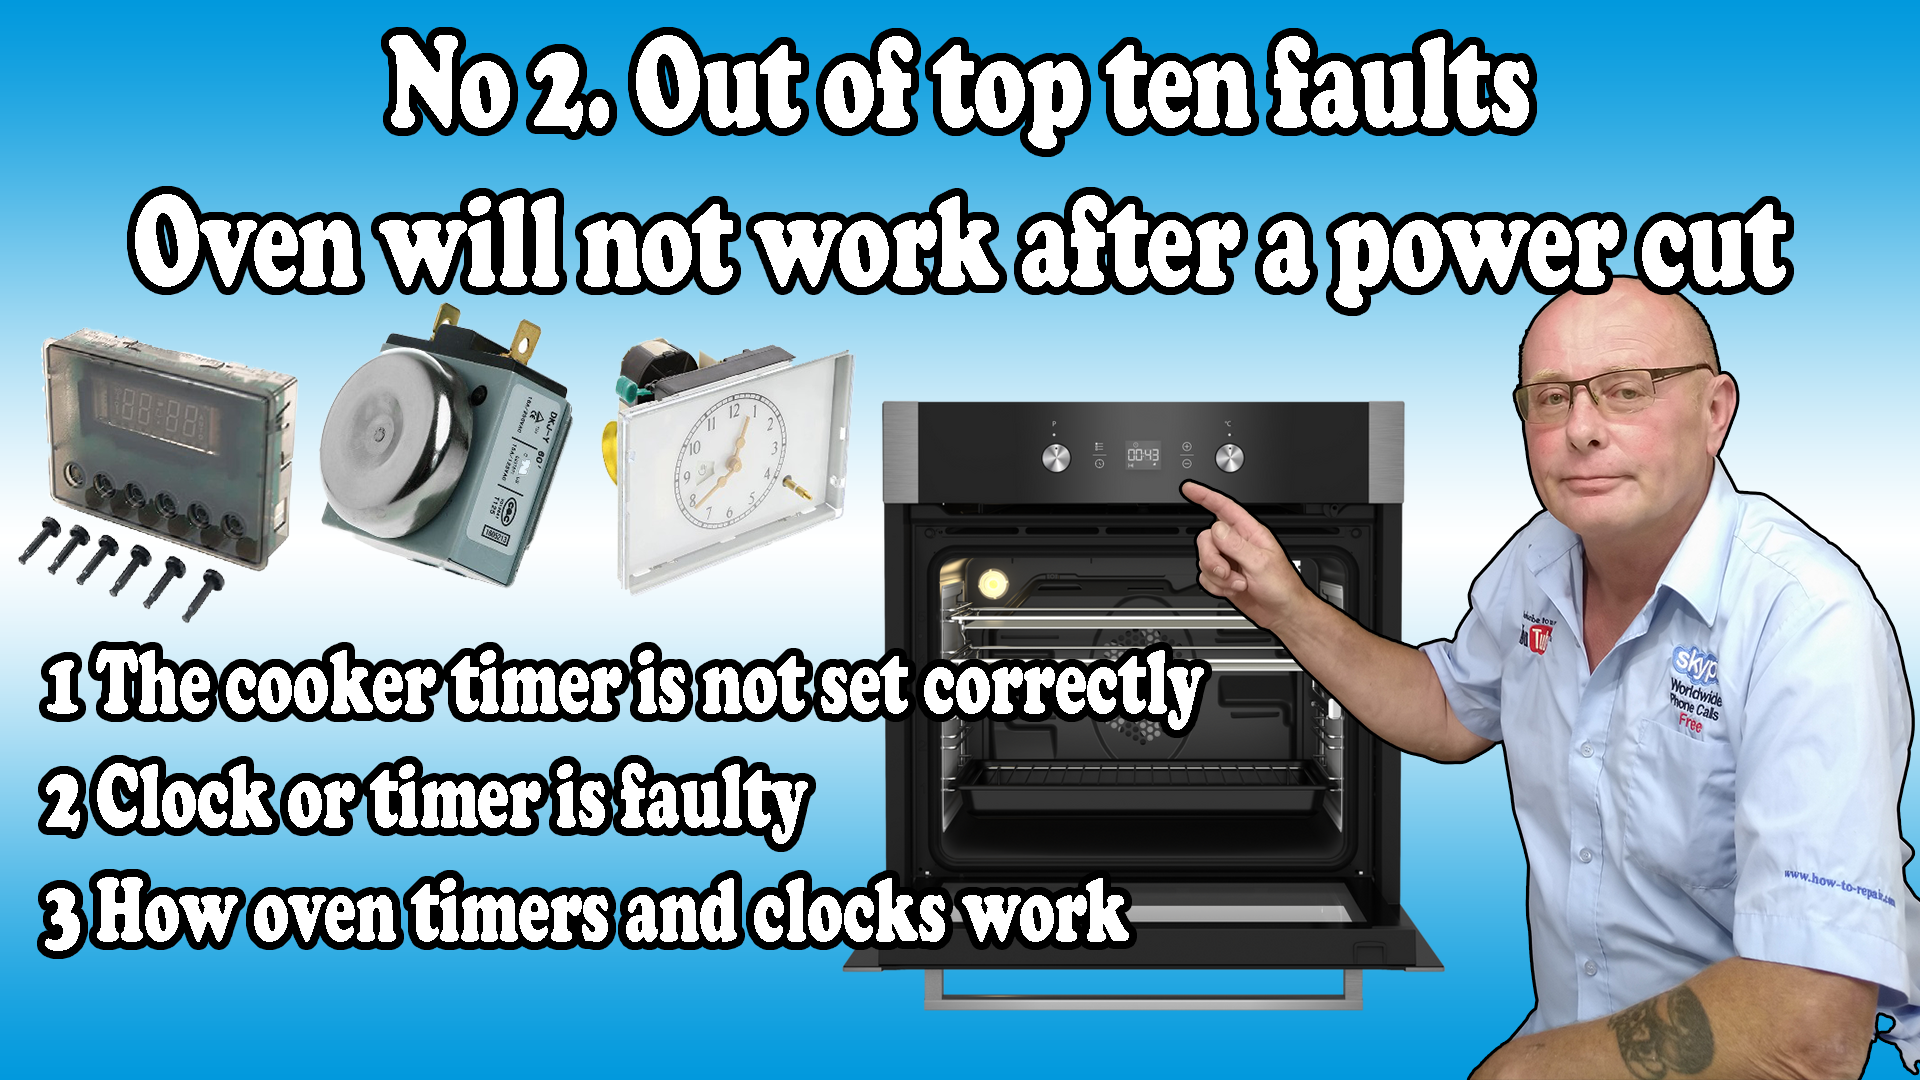 Cooker or Oven will not work after a power cut